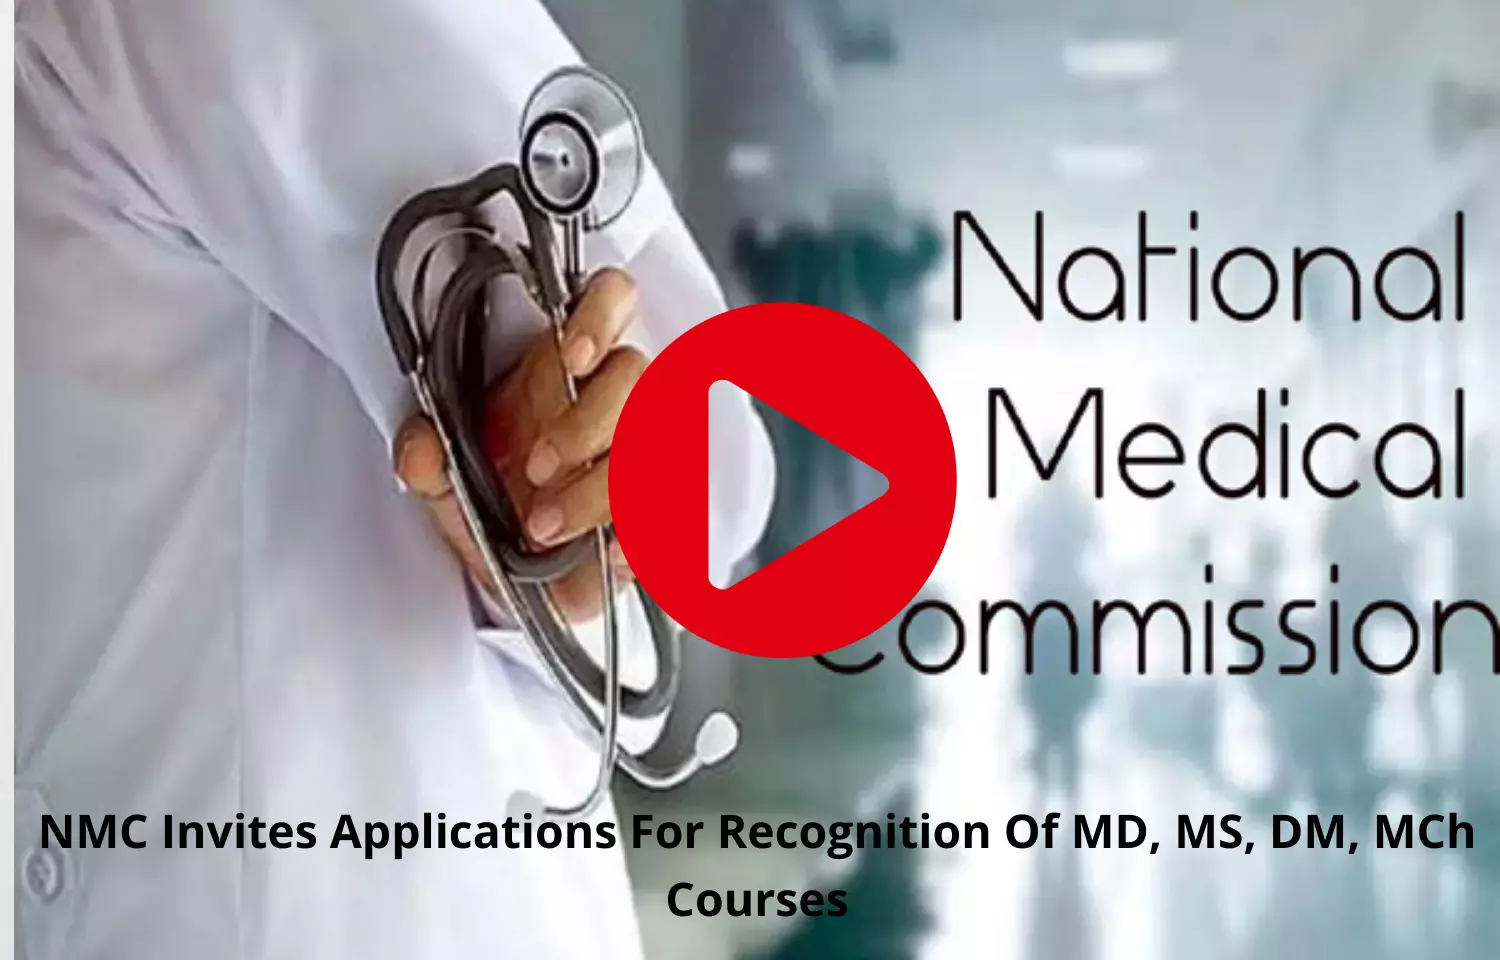 NMC opens Applications For Recognition Of MD, MS, DM, MCh Courses